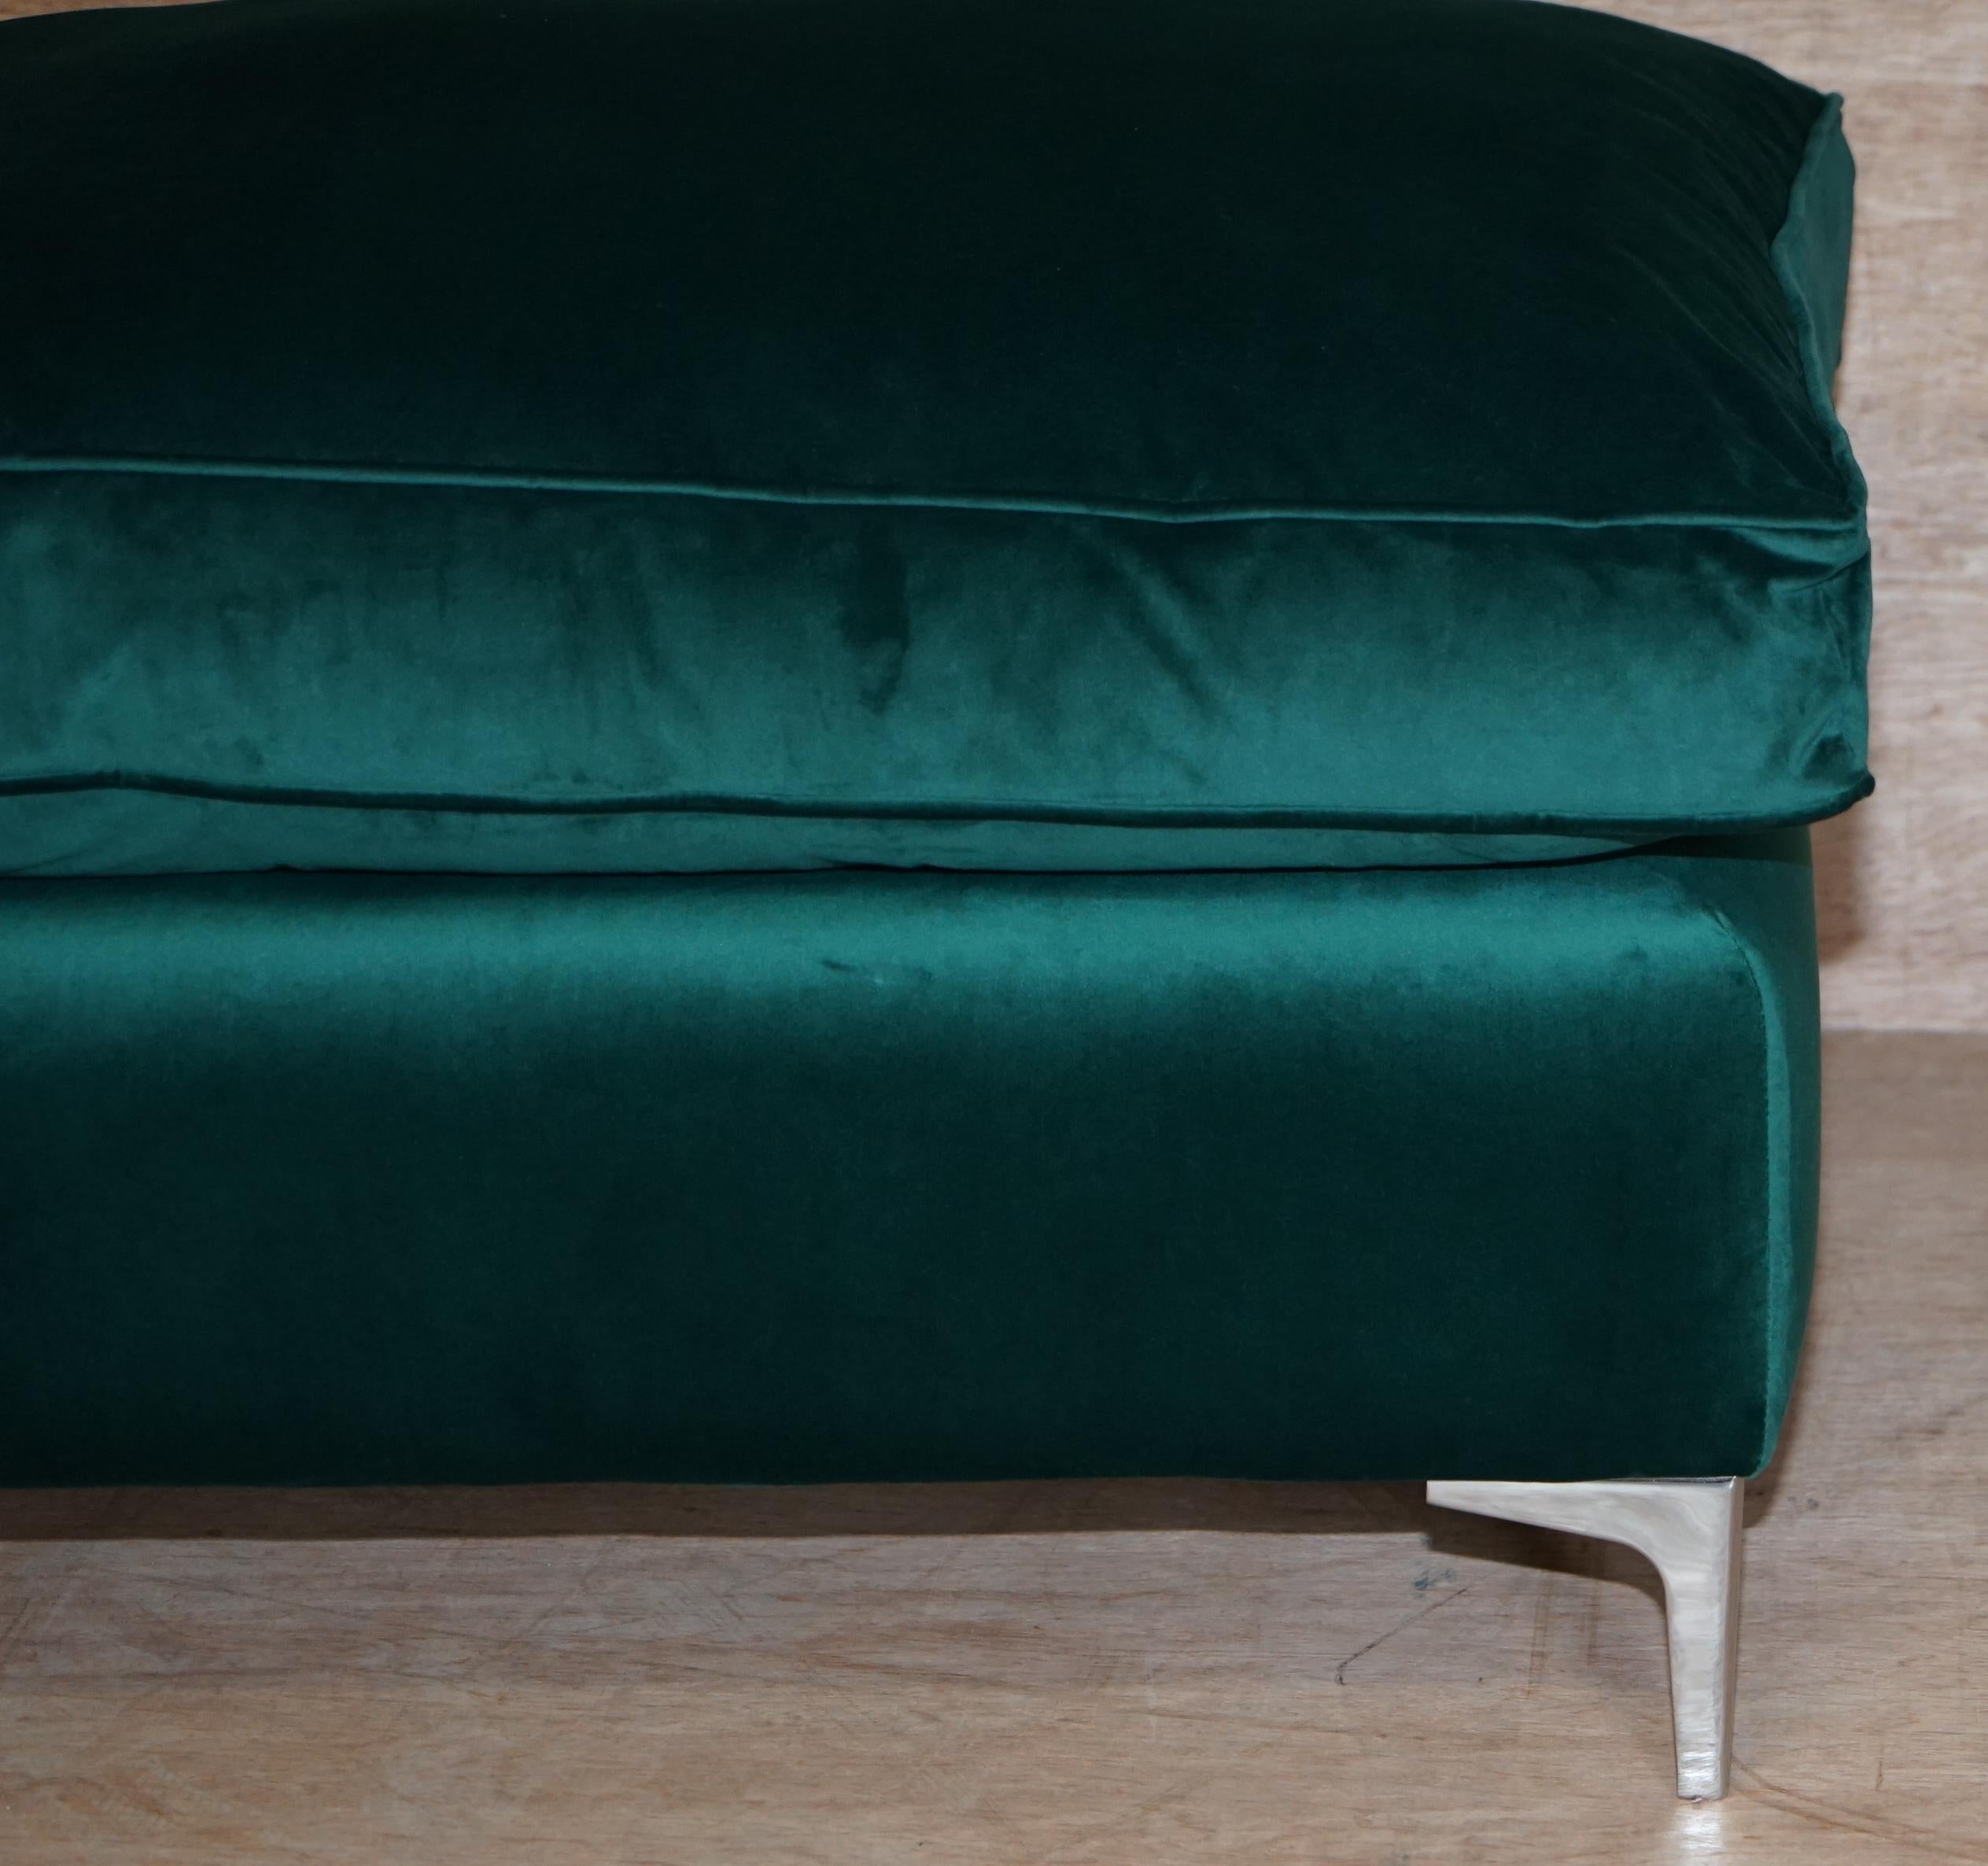 English Stunning Ex Display Emerald Green Velvet Large Ottoman Footstool or Bench Seat For Sale